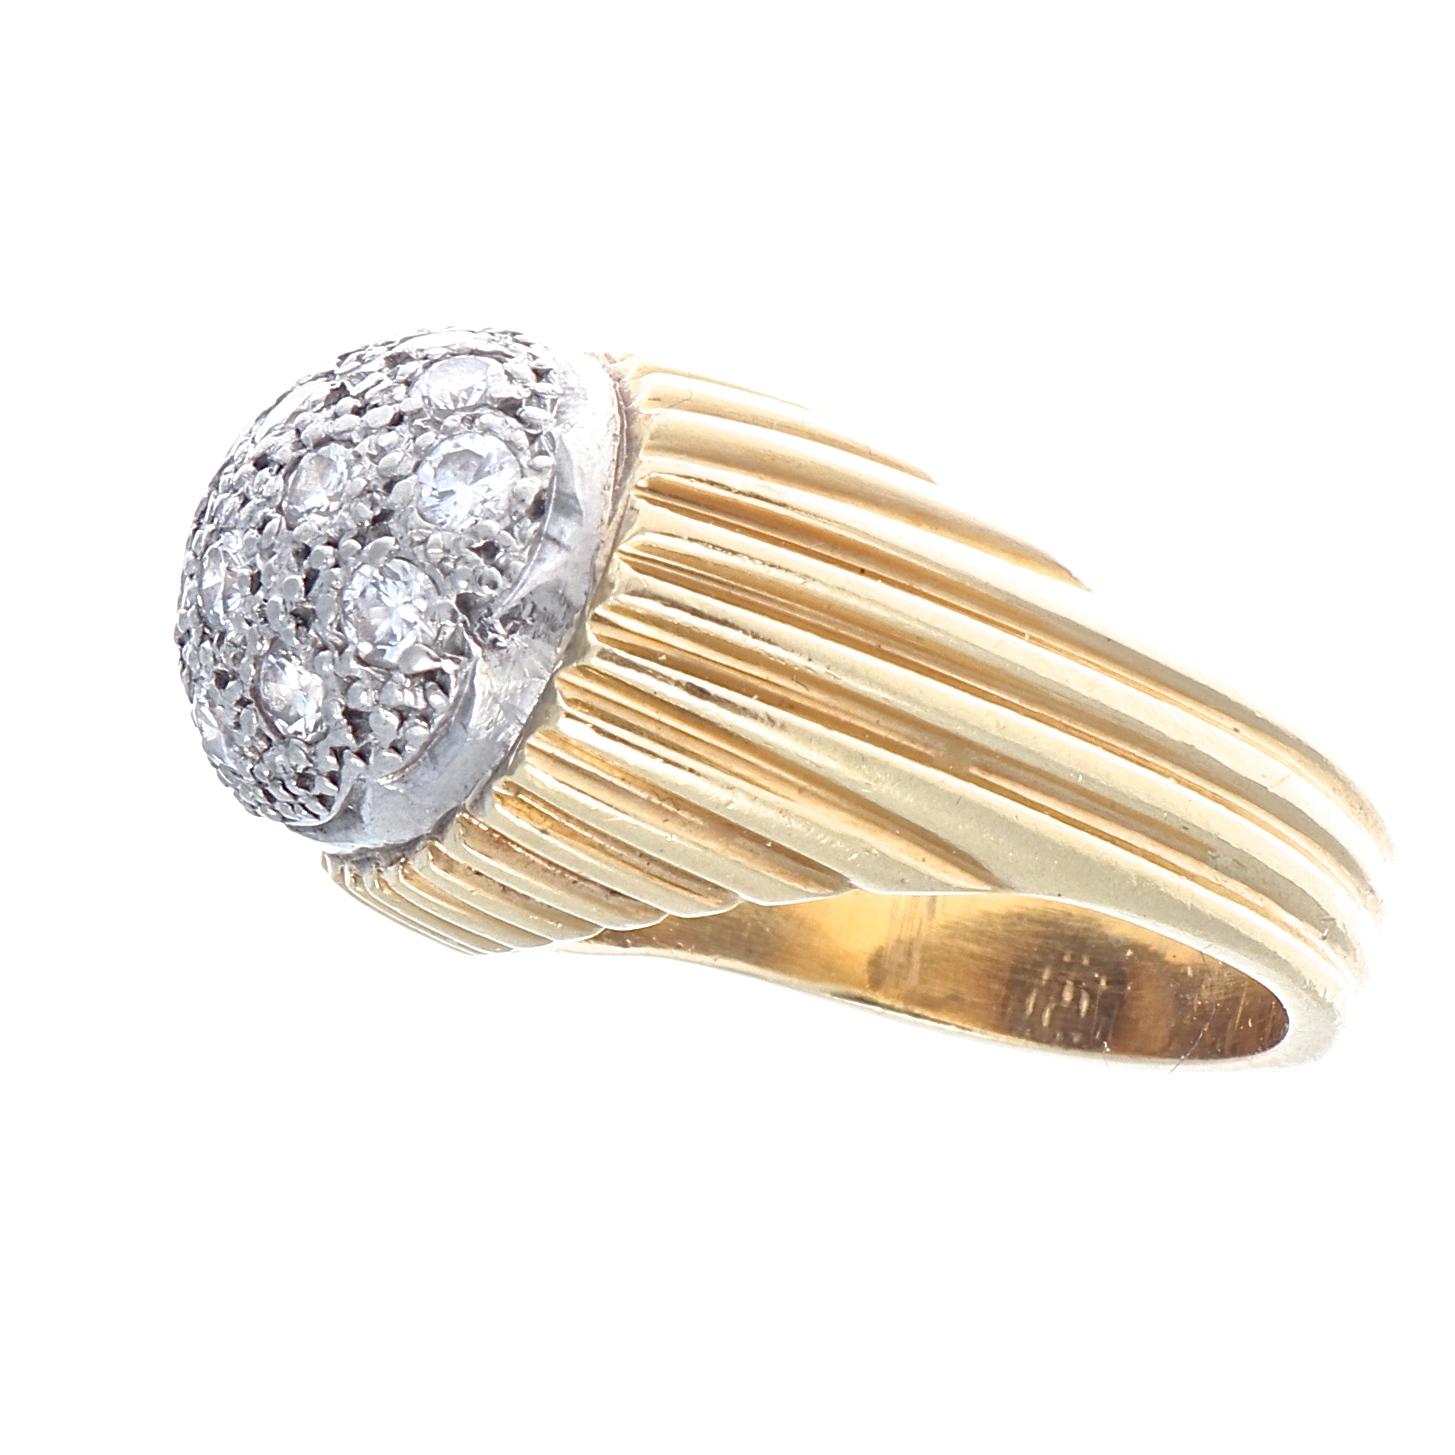 Expression through stylistic design. Featuring an 18k ribbed gold ring with a lively dome of diamonds that are set in platinum . 

Ring size 4-3/4 and can easily be resized to fit, if needed this would come complimentary with your purchase.